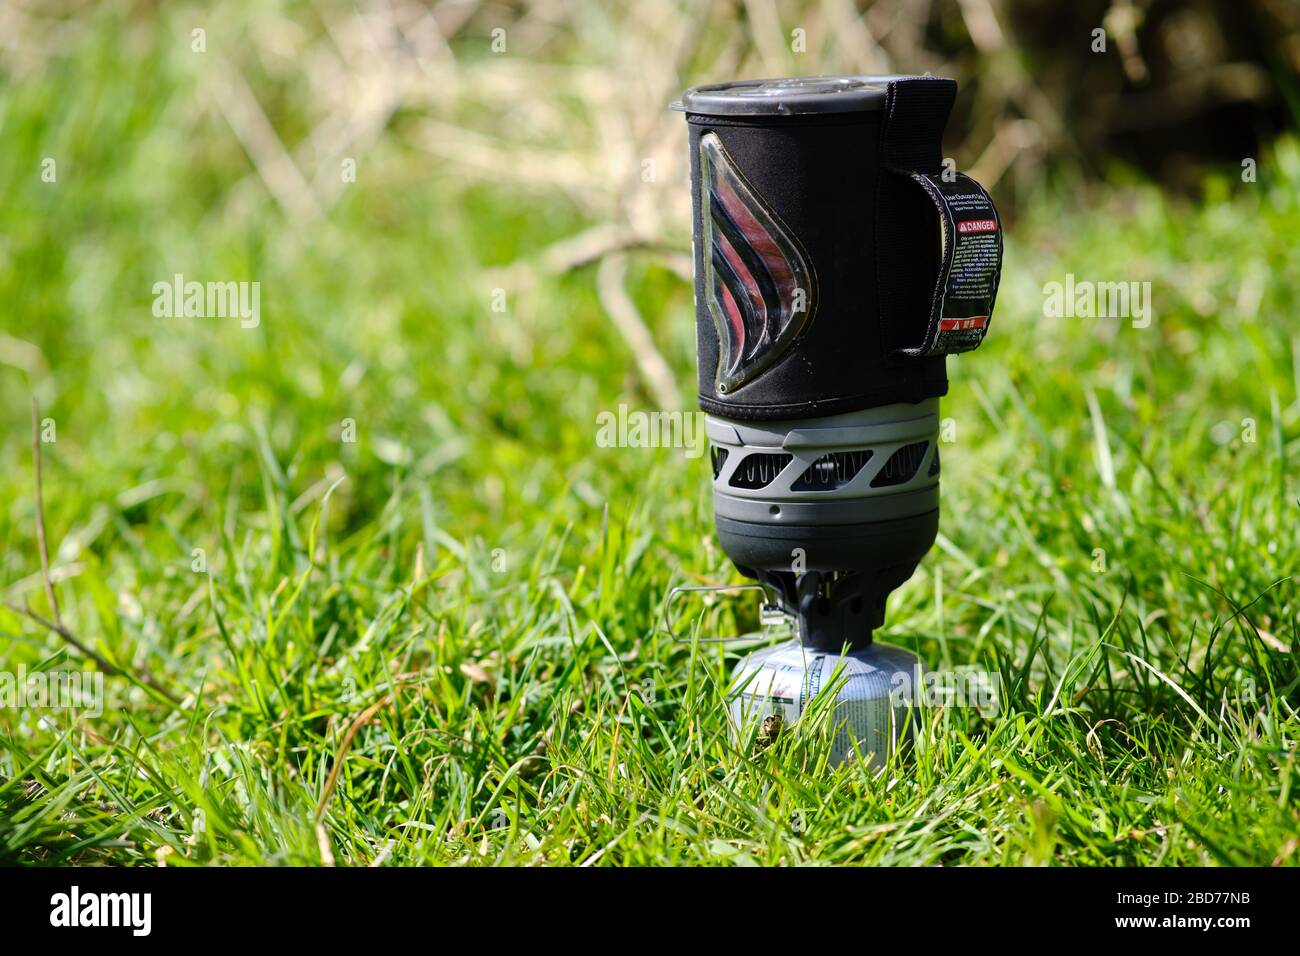 lightweight fast boil gas camping stove being used to boil water in long grass blurred out of focus background Stock Photo